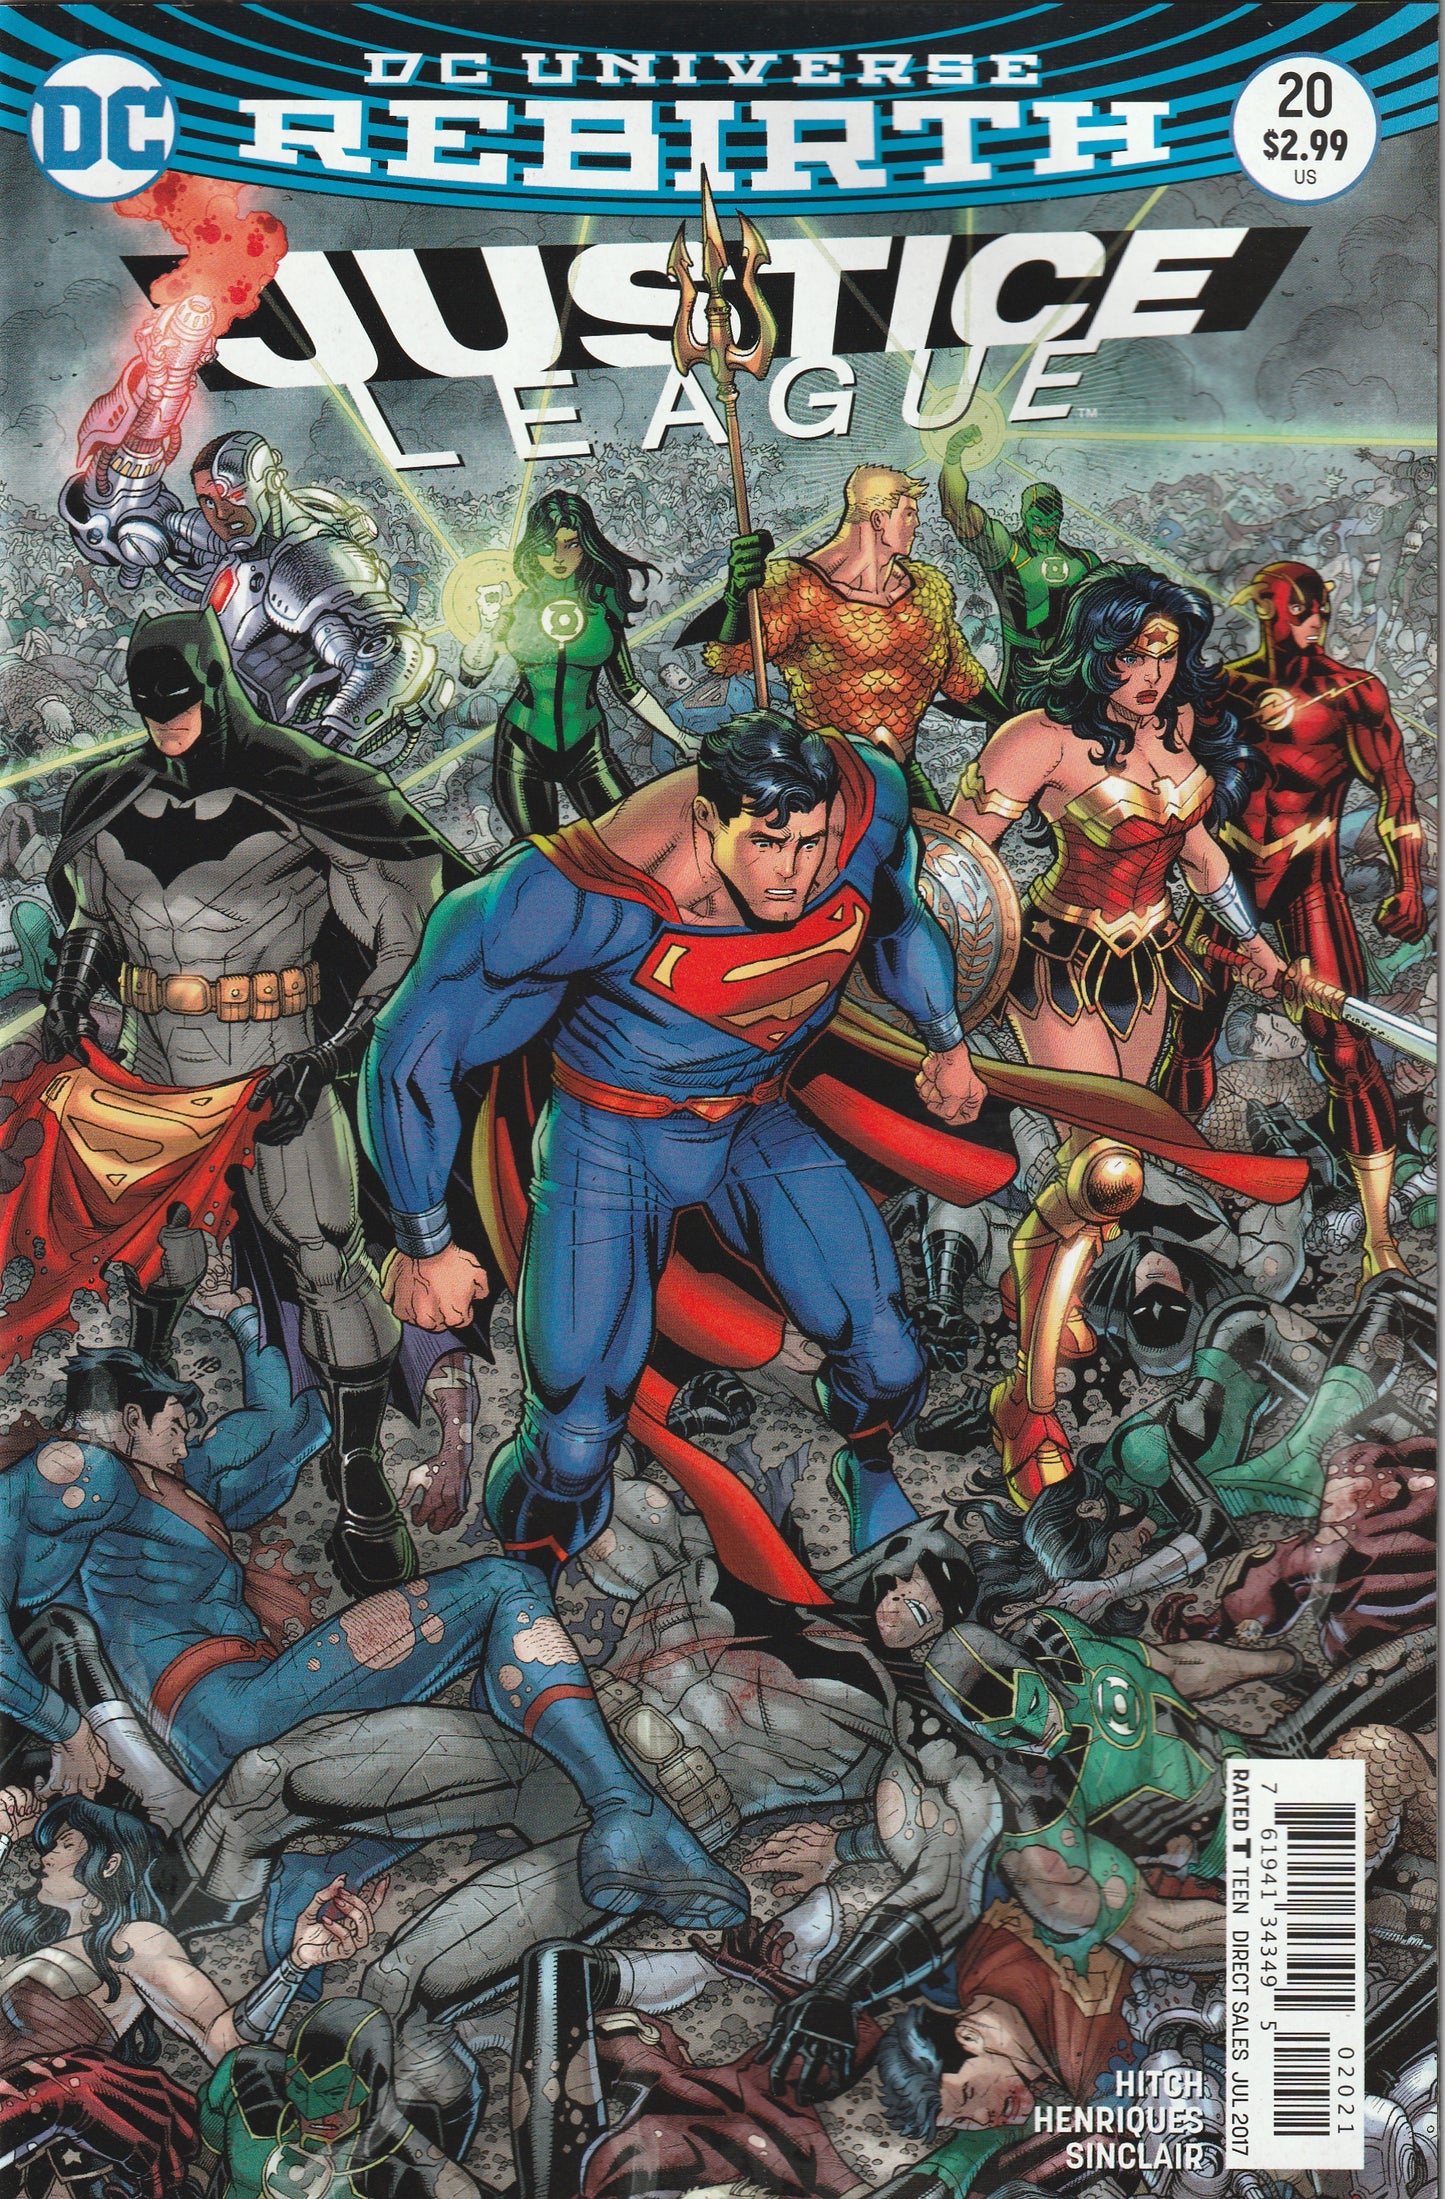 Justice League - Rebirth #20 (2017) - Nick Bradshaw Variant Cover